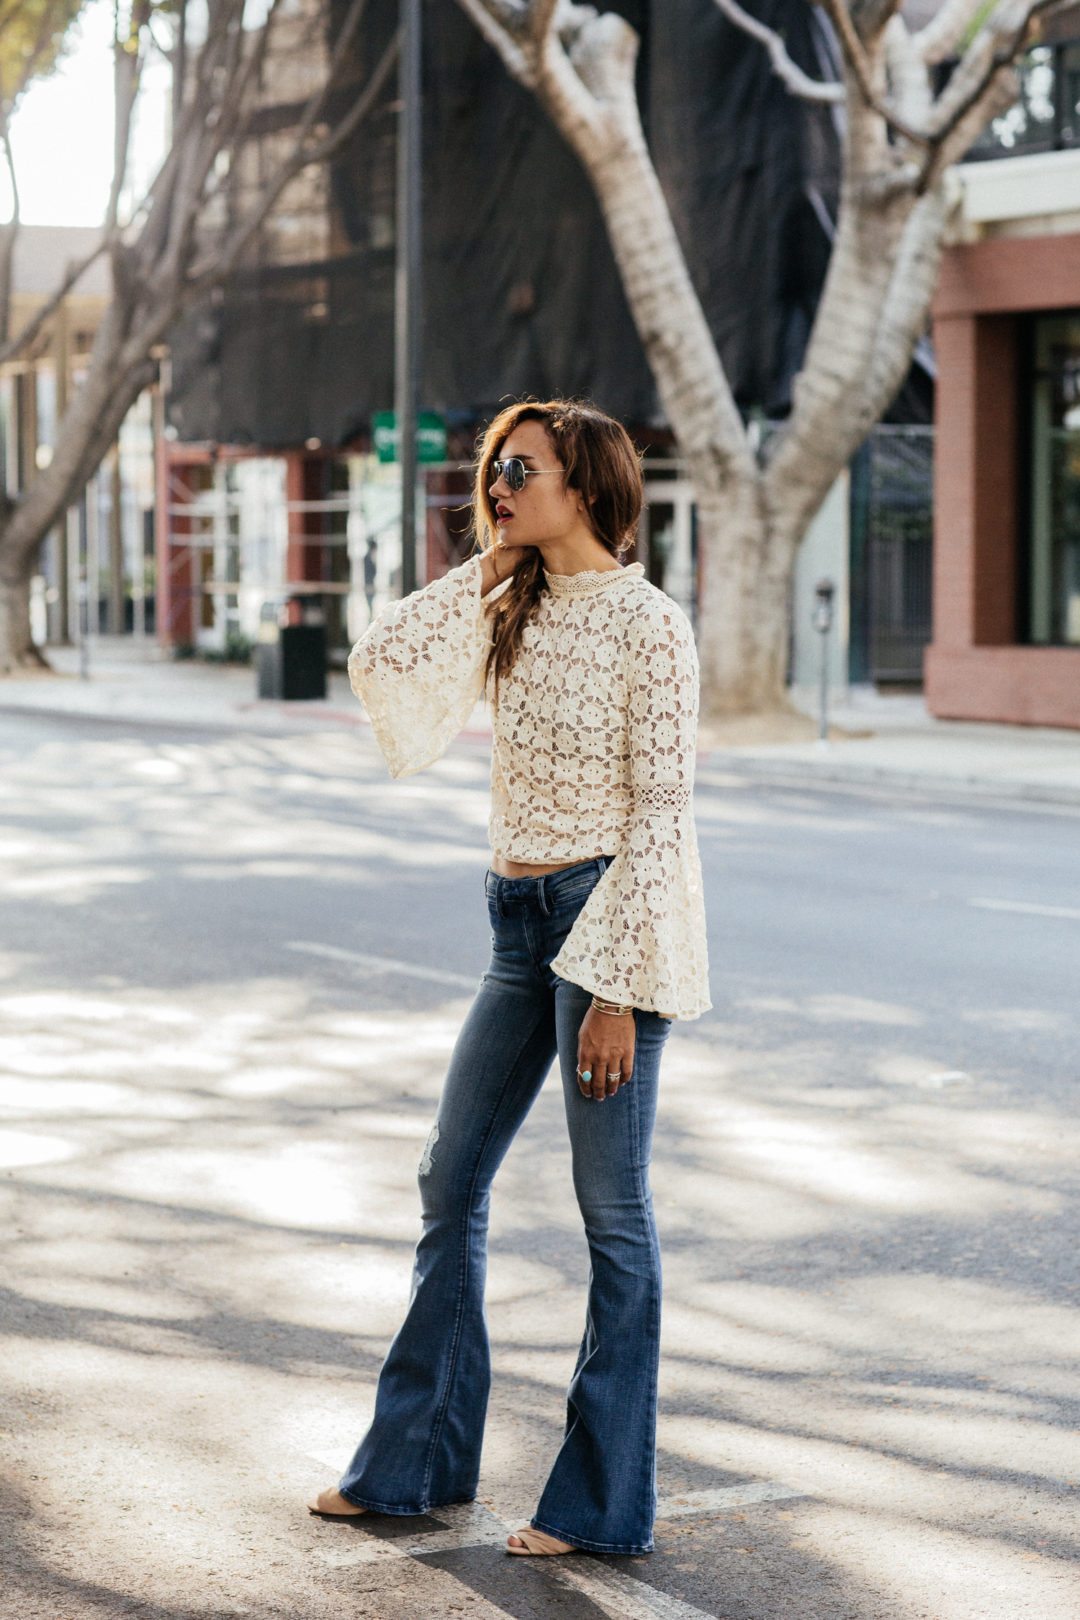 Weekends in lace and bell sleeves - Shalice Noel